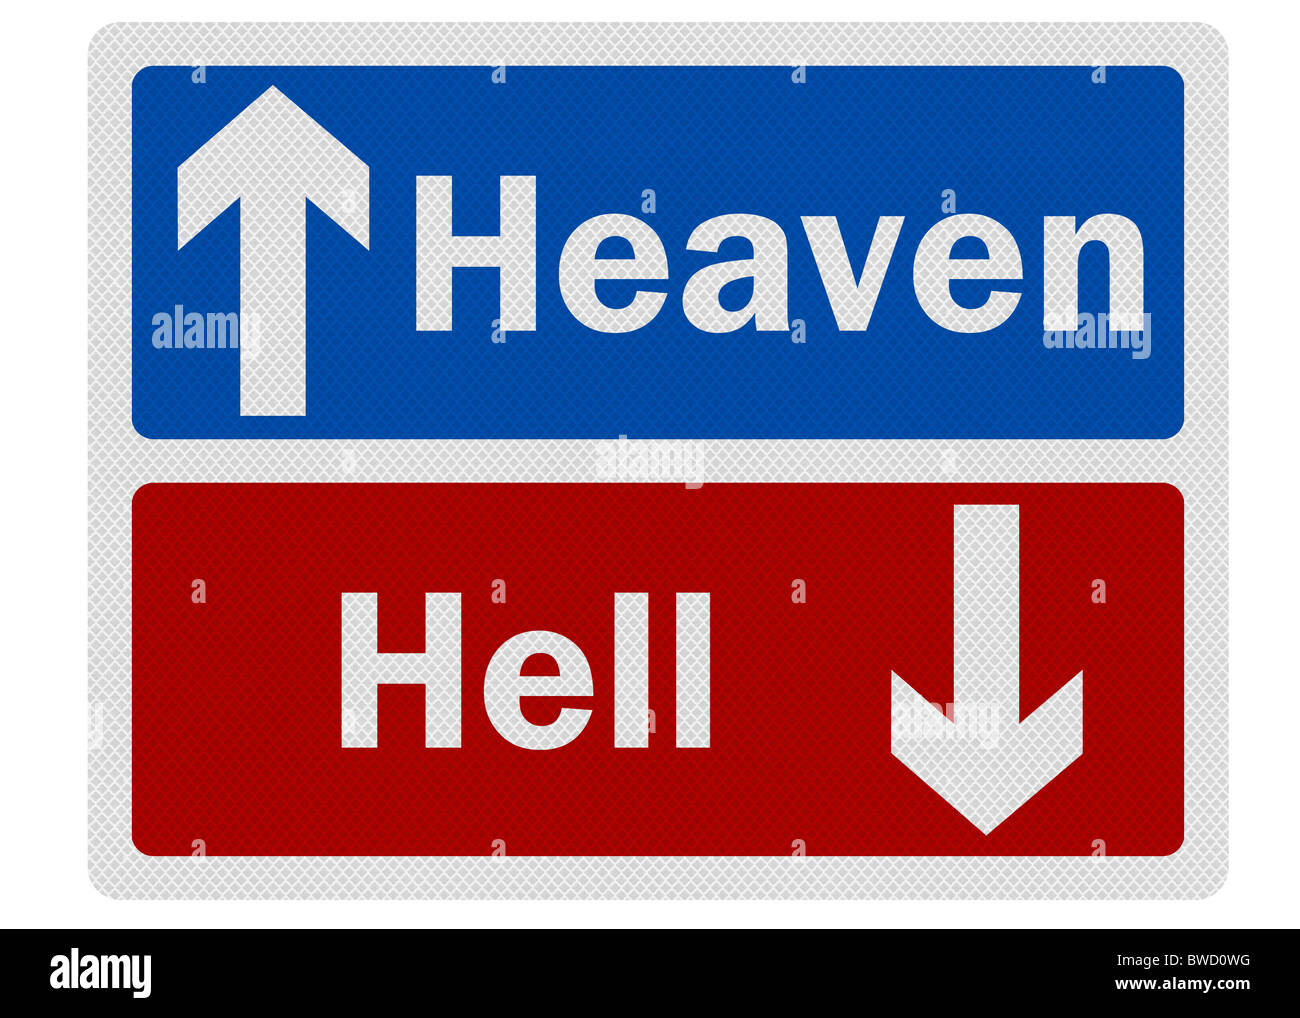 Photo realistic metallic reflective 'heaven / hell' road sign, isolated on pure white Stock Photo